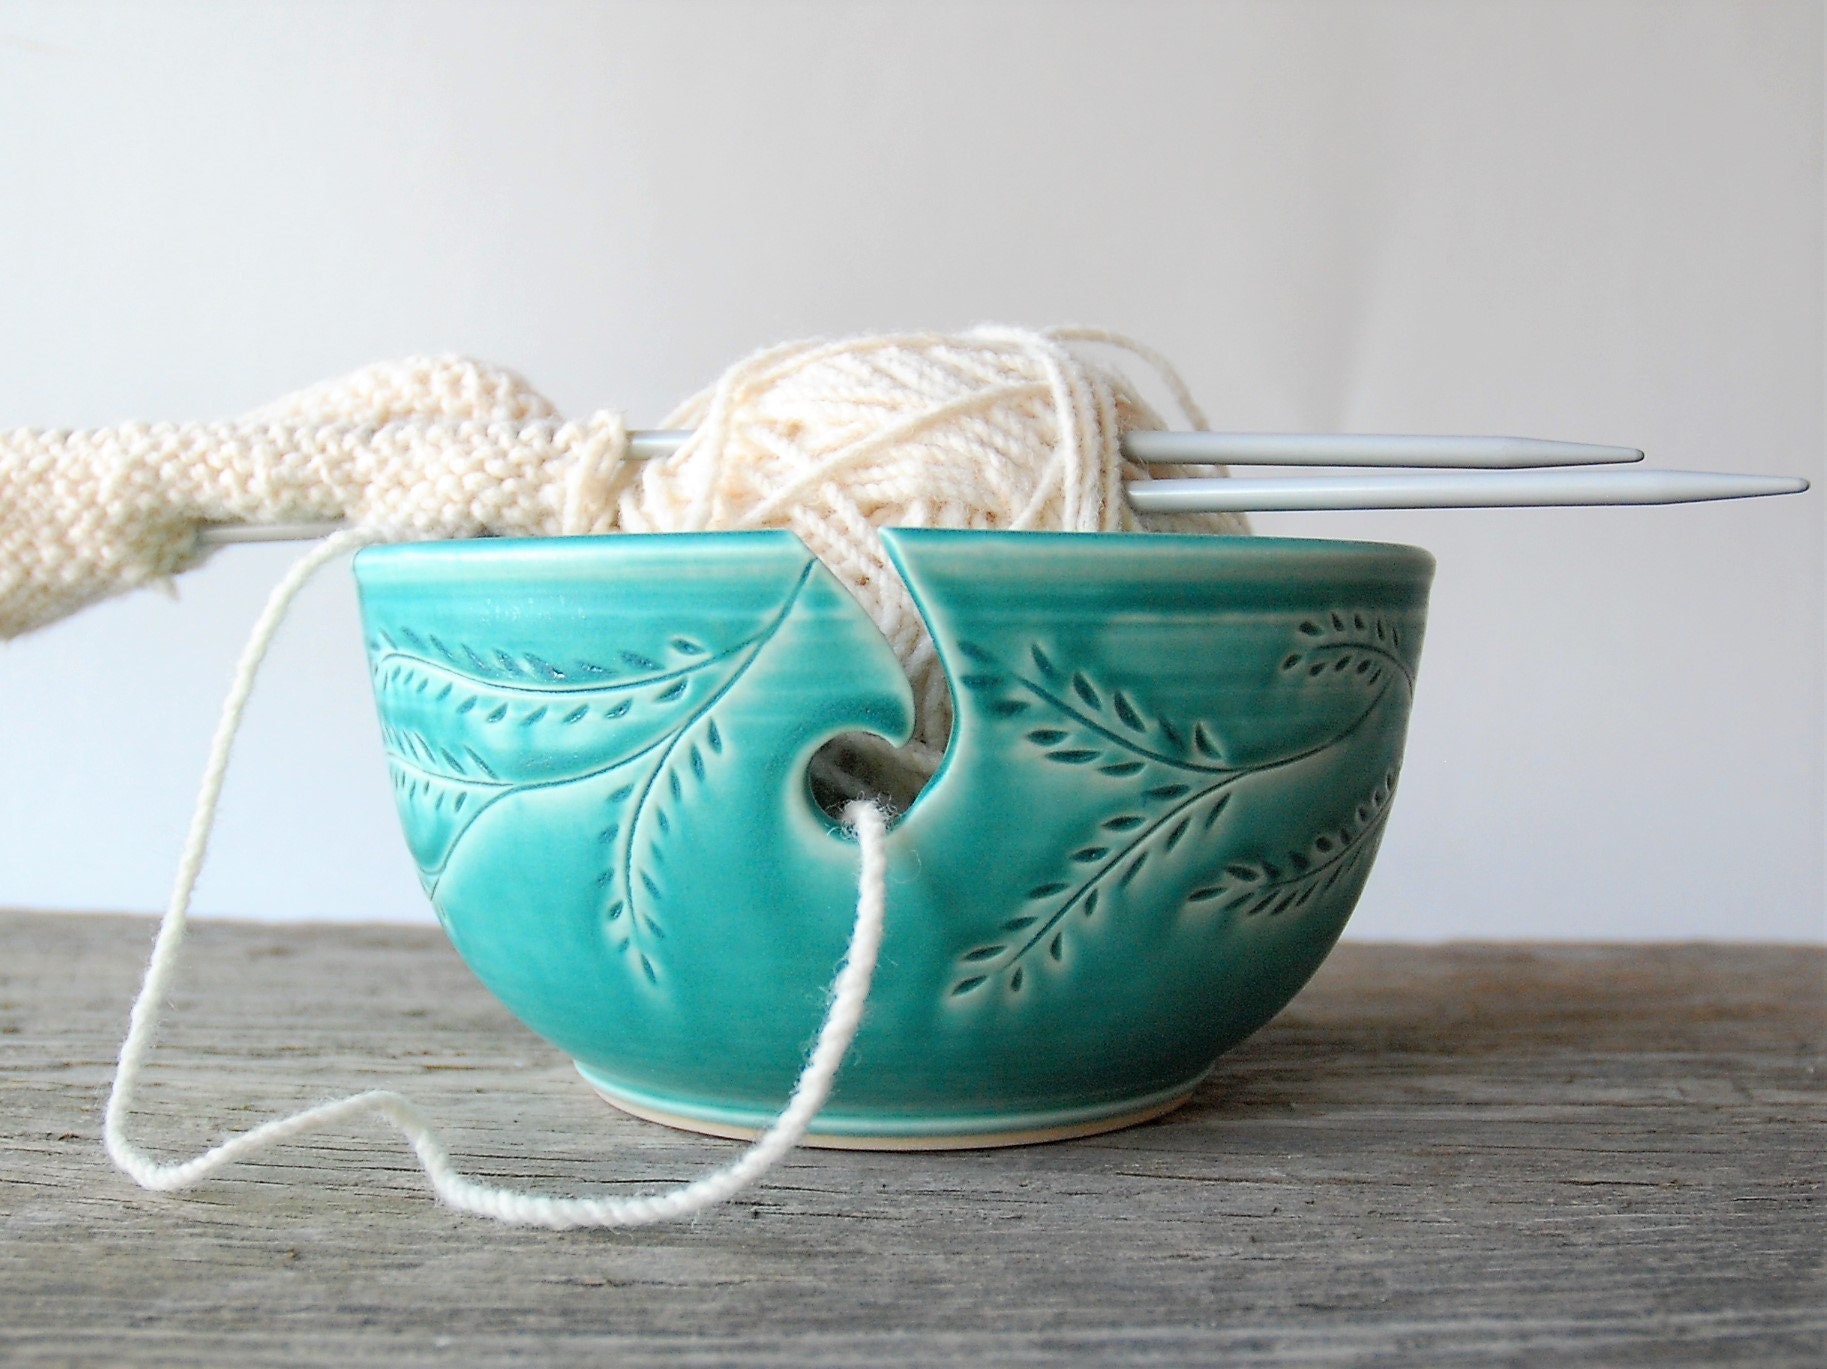 Ceramic Wool Bowl Home Accents Decor Crocheting Crafts Porcelain Yarn Bowls  Household - AliExpress